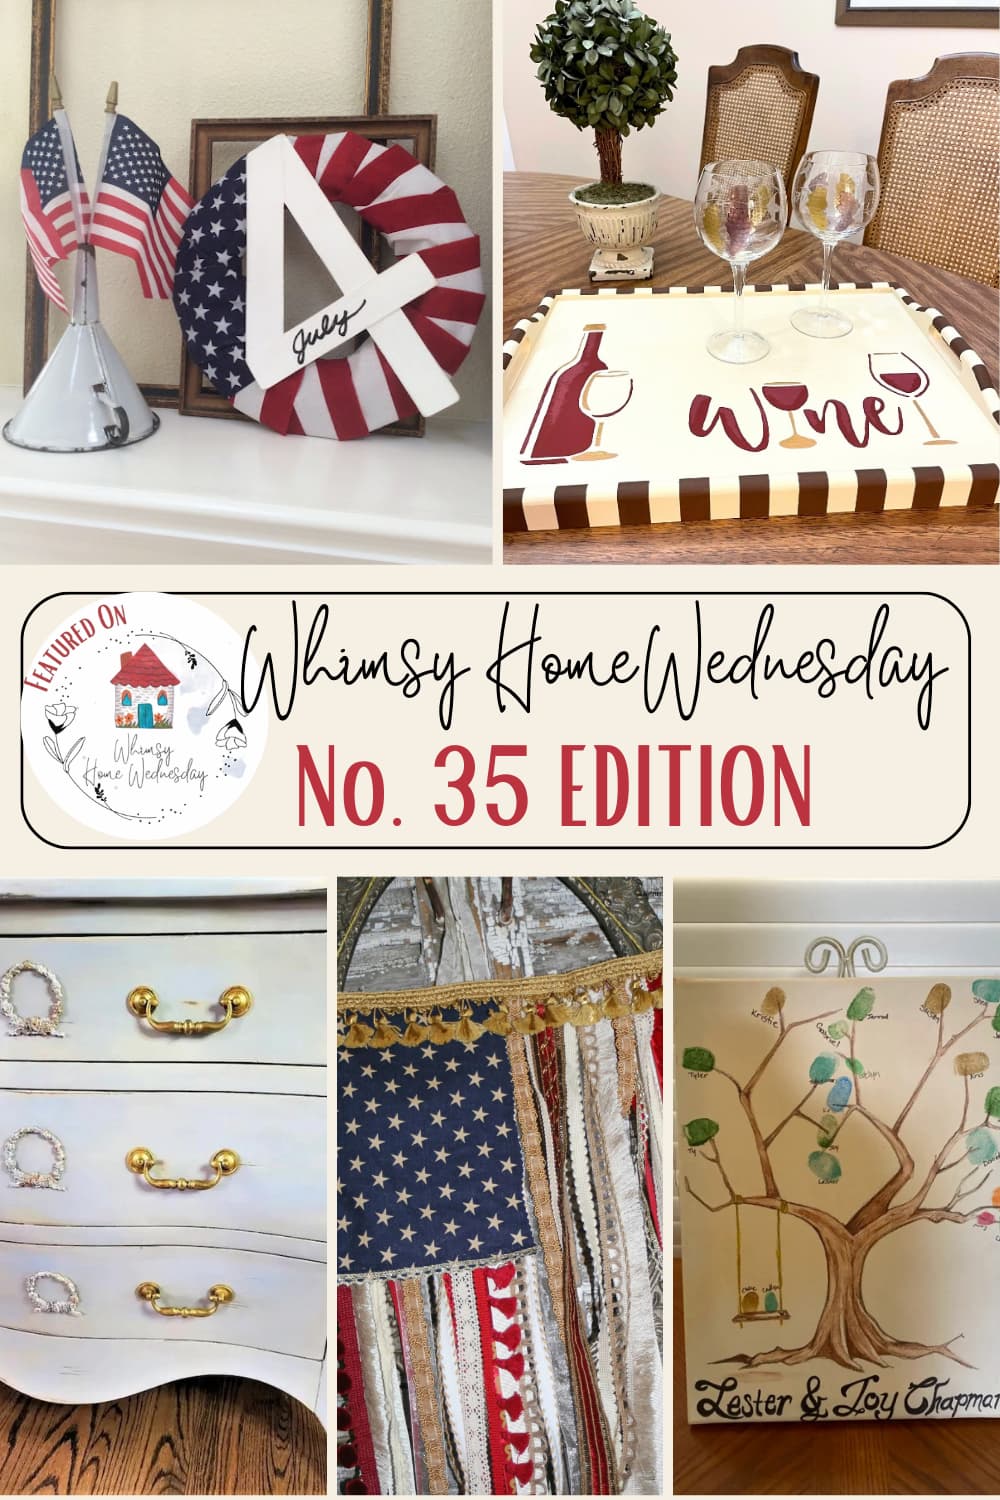 Join us on Whimsy Home Wednesday Blog Link Party No. 35 and see host projects, the features from the previous week and link up your posts!